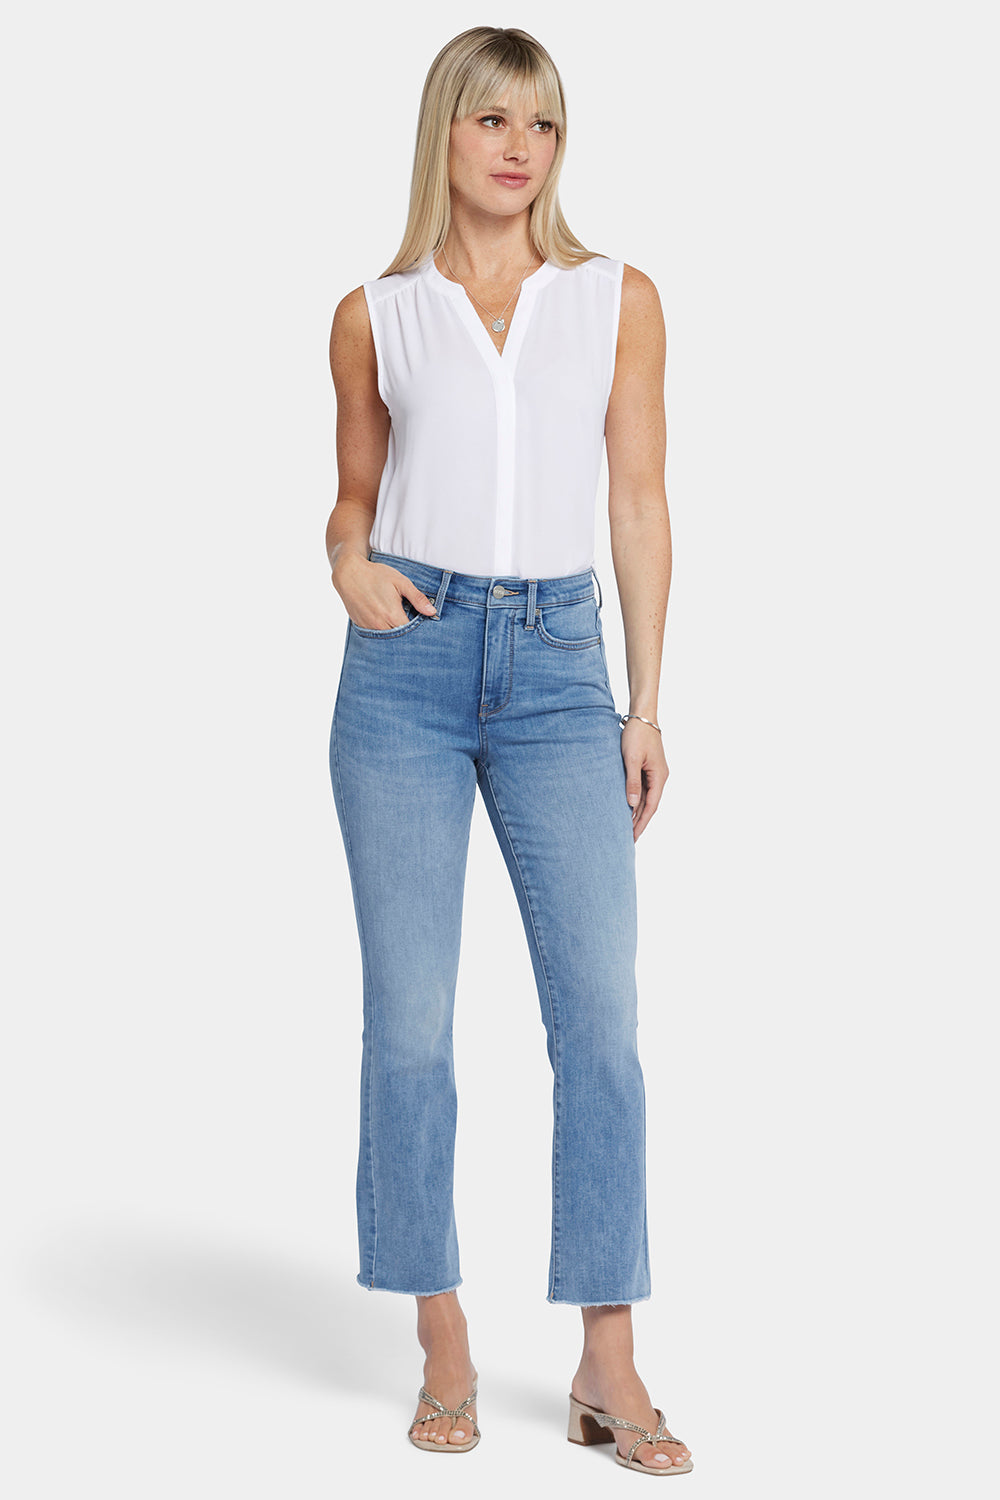 Women's Ankle Jeans - Relaxed, Bootcut & Slim